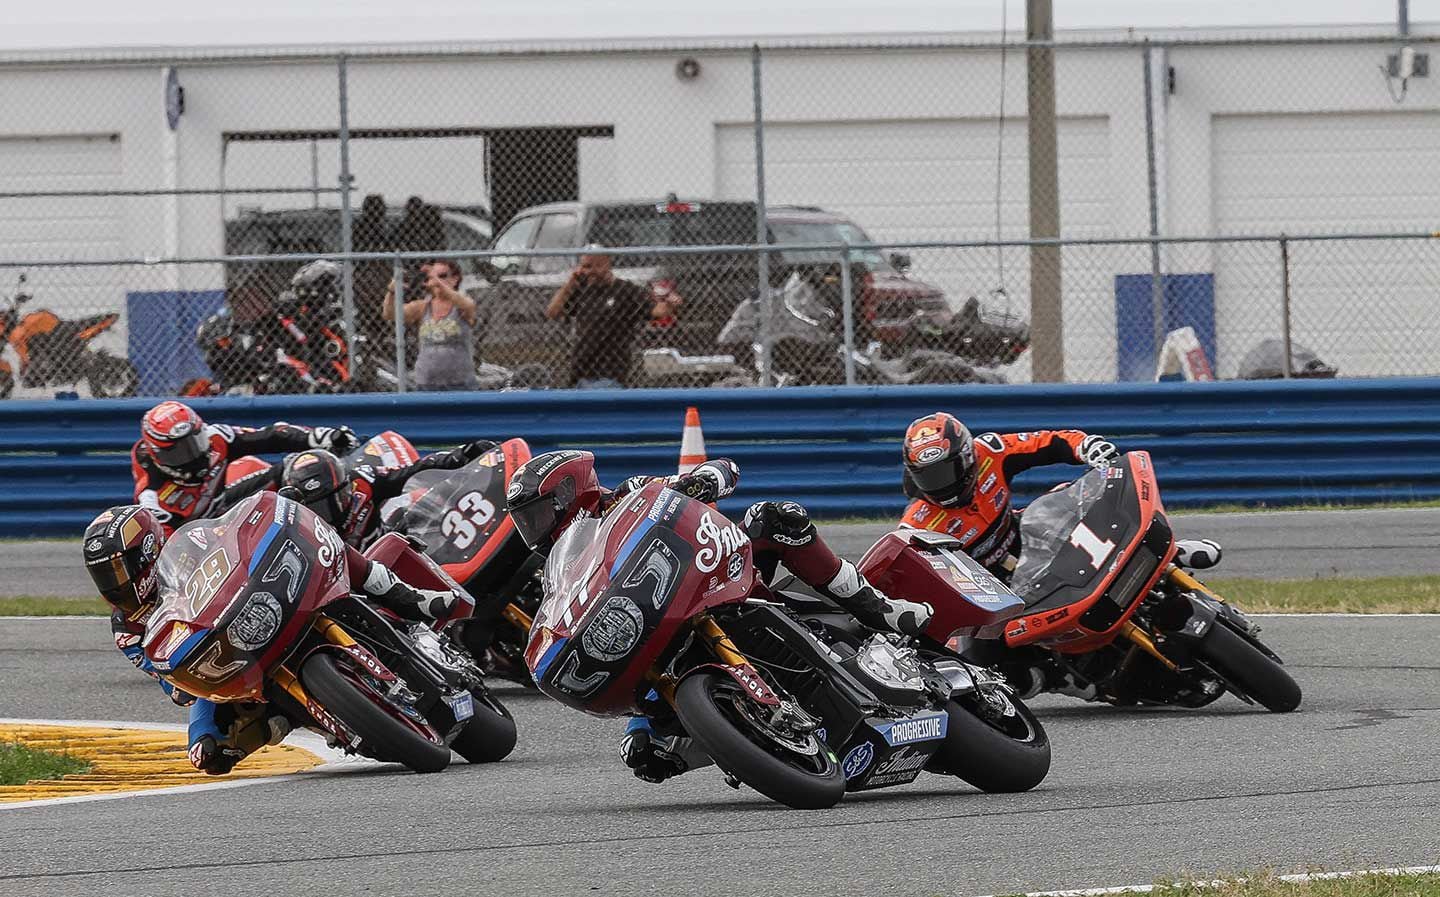 Bagger racing has had a positive effect on the race attendance and aftermarket sales.